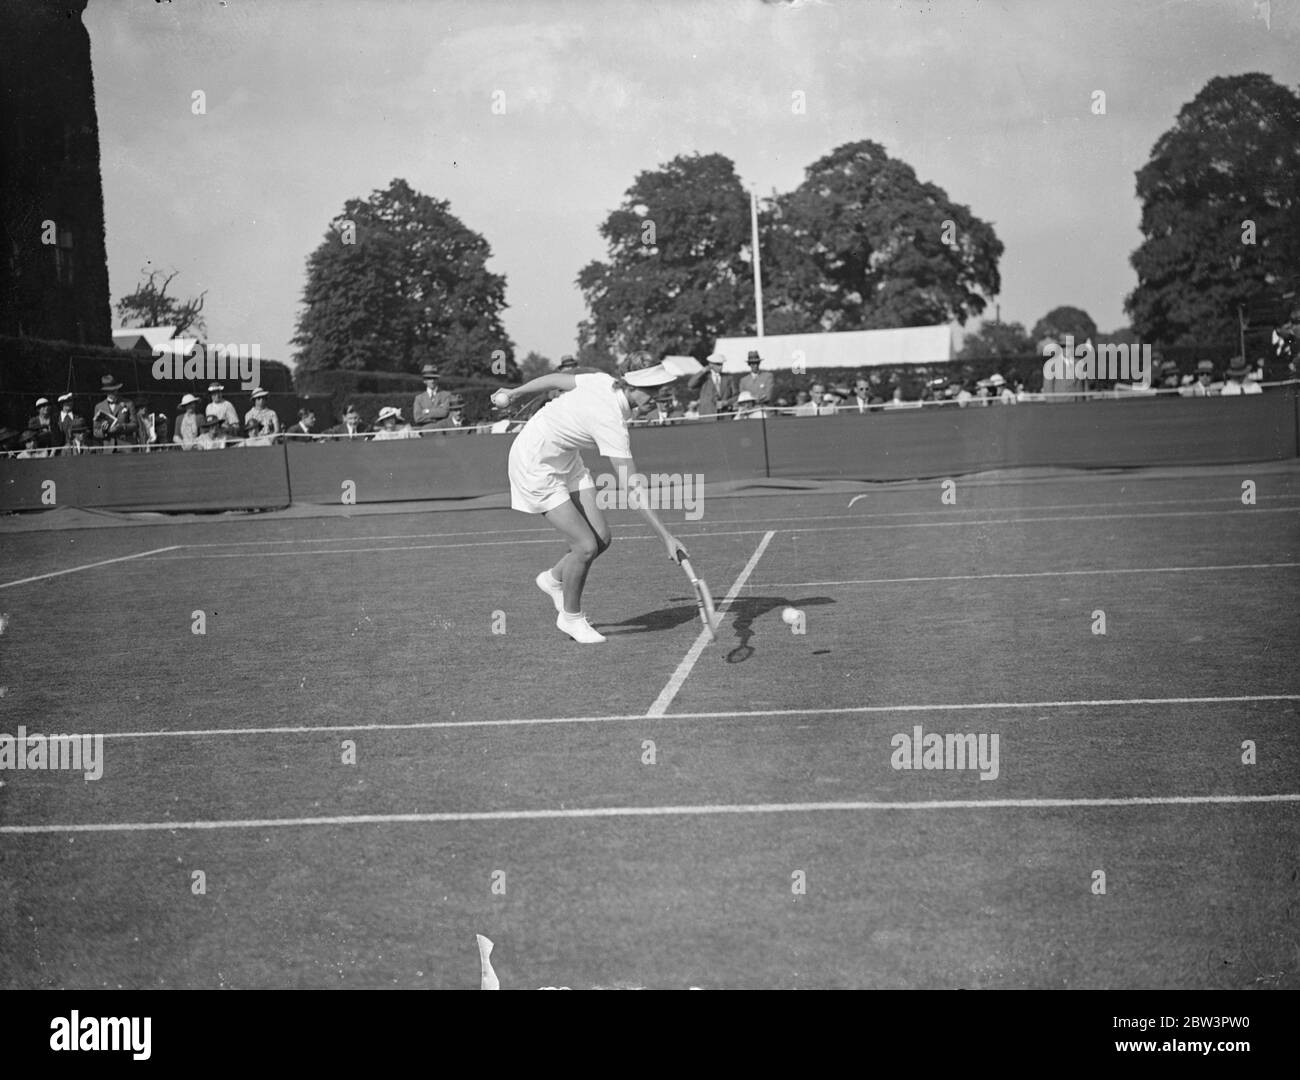 Helen Jacobs Defeats Mrs . Cable In Wimbledon Championships . Miss Helen Jacobs ( USA ) defeated Mrs . Cable of Great Britain 6 - 1 , 6 - 0 in the first round of the women ' s singles in the Wimbledon Tennis Championships Photo Shows : Mrs . Cable in play against Helen Jacobs . 23 Jun 1936 Stock Photo